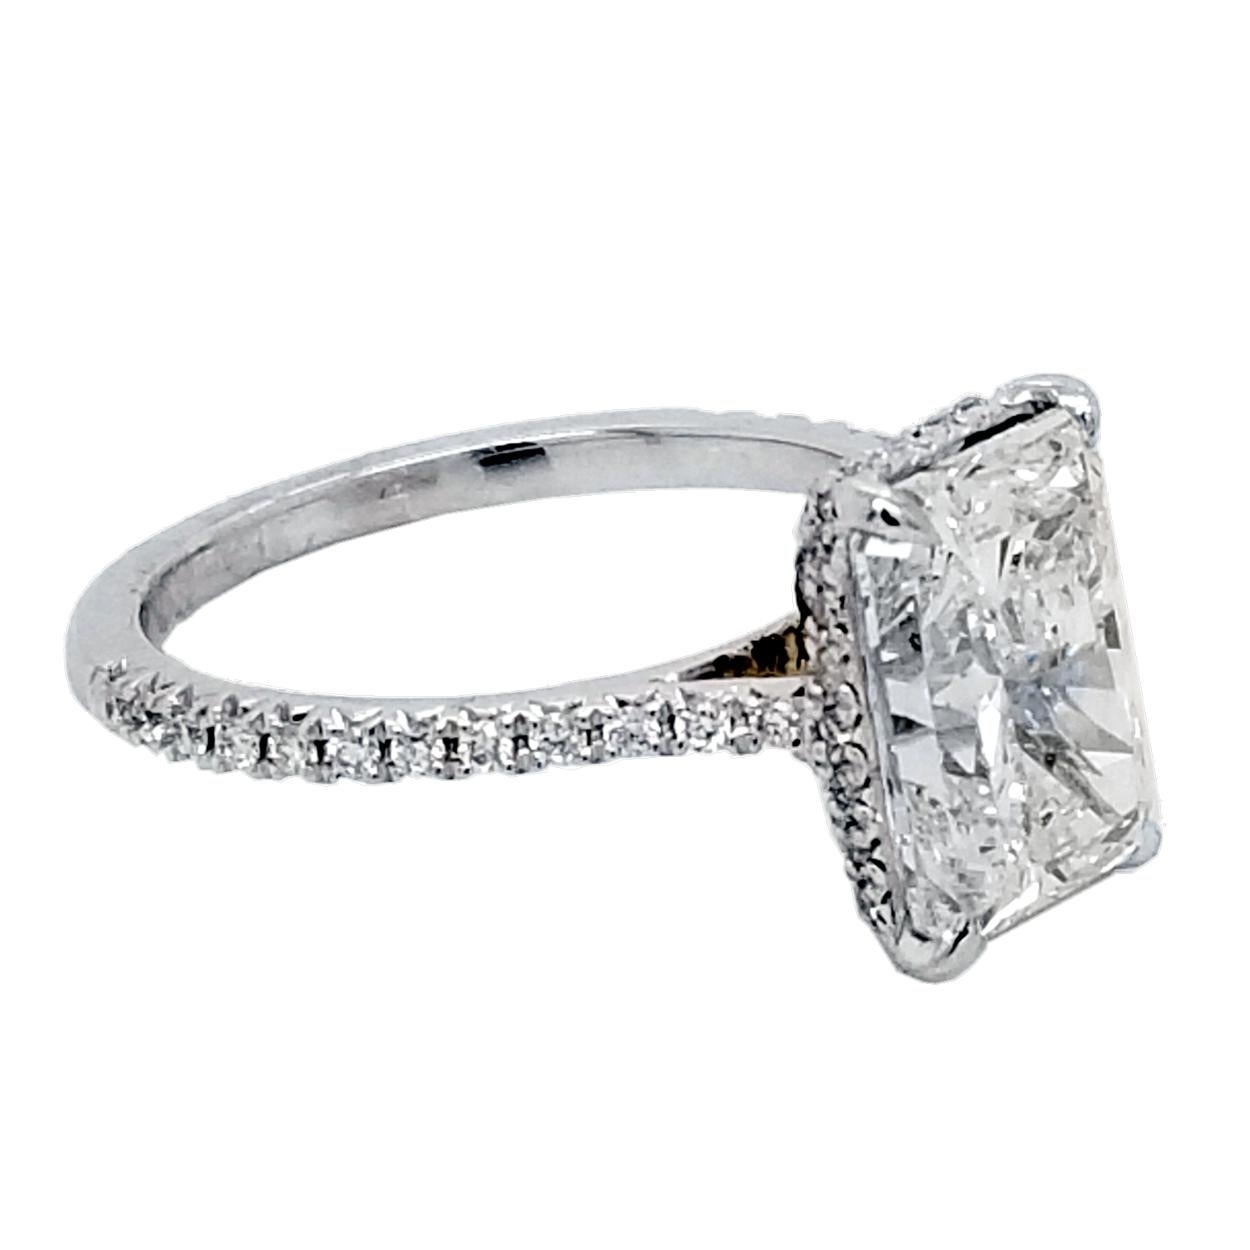 A very fine Radiant D/SI2 GIA certified Diamond set in a fine 18k gold French-Pave set Engagement Ring with side halo. Total diamond weight of 0.25 Ct. on the side. 

Diamond specs:
Center stone: 3.04 Ct GIA Certified D/SI2 Radiant natural